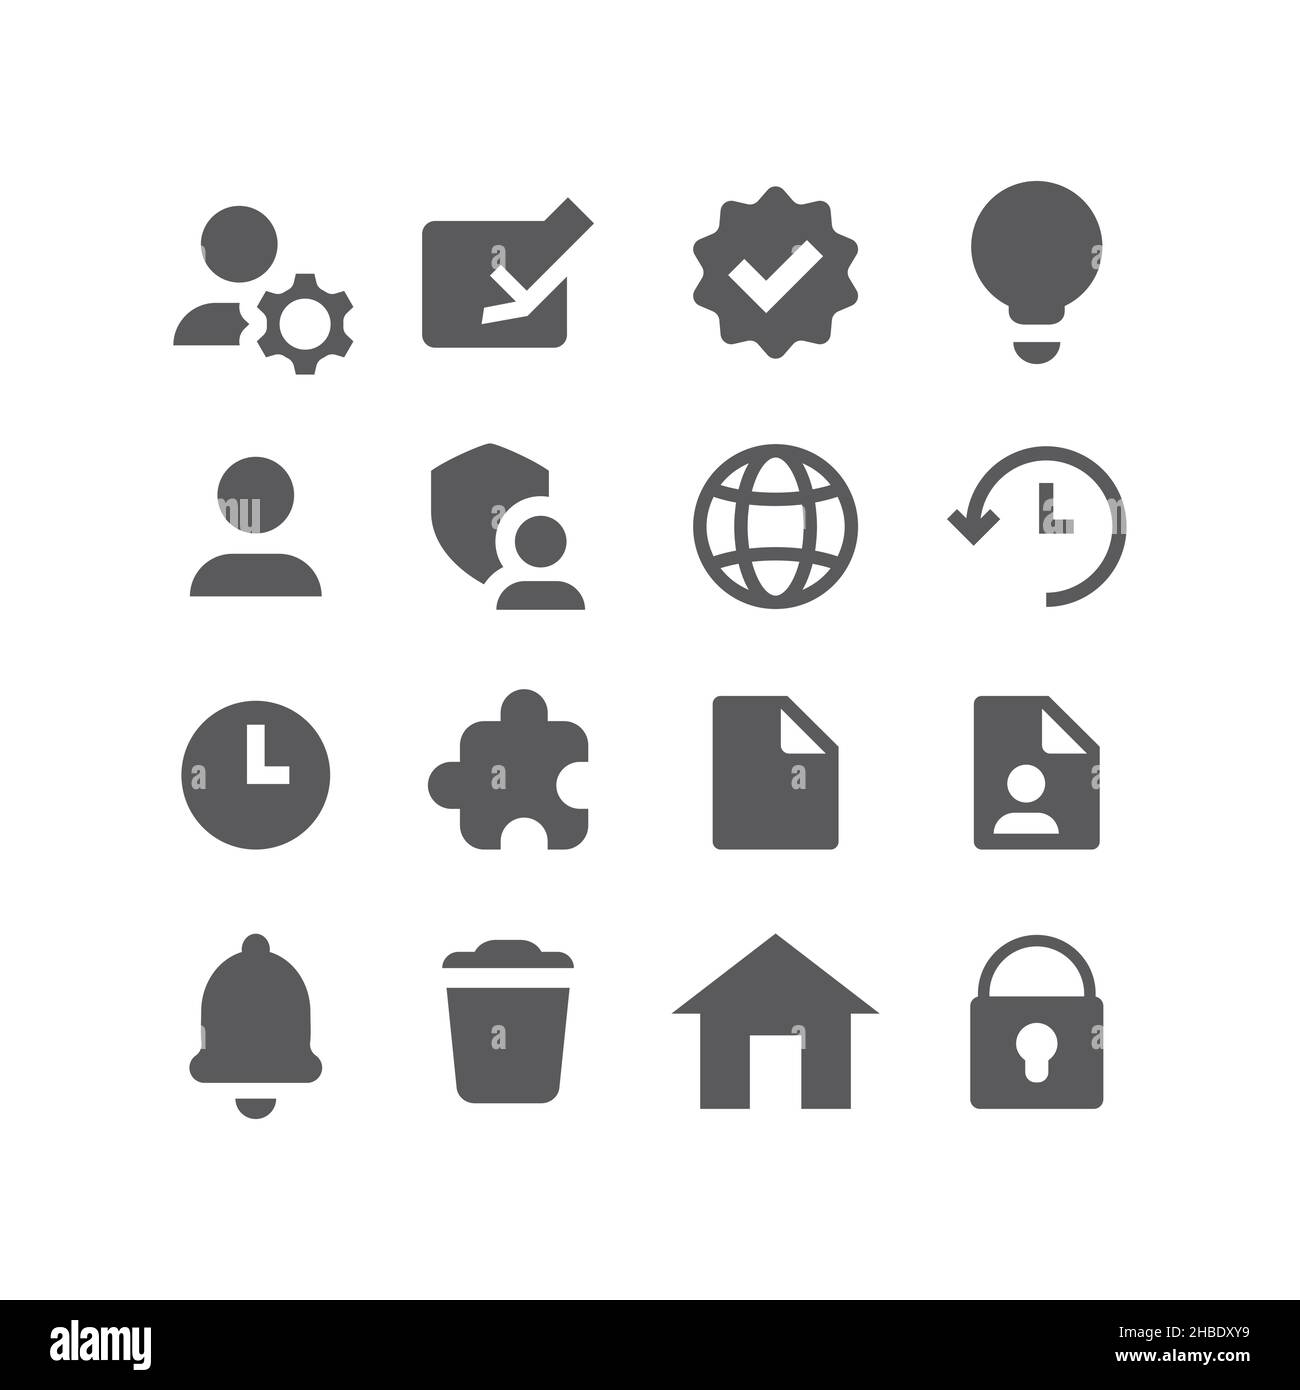 Web, website management filled icon set. Black vector web page icons. Stock Vector